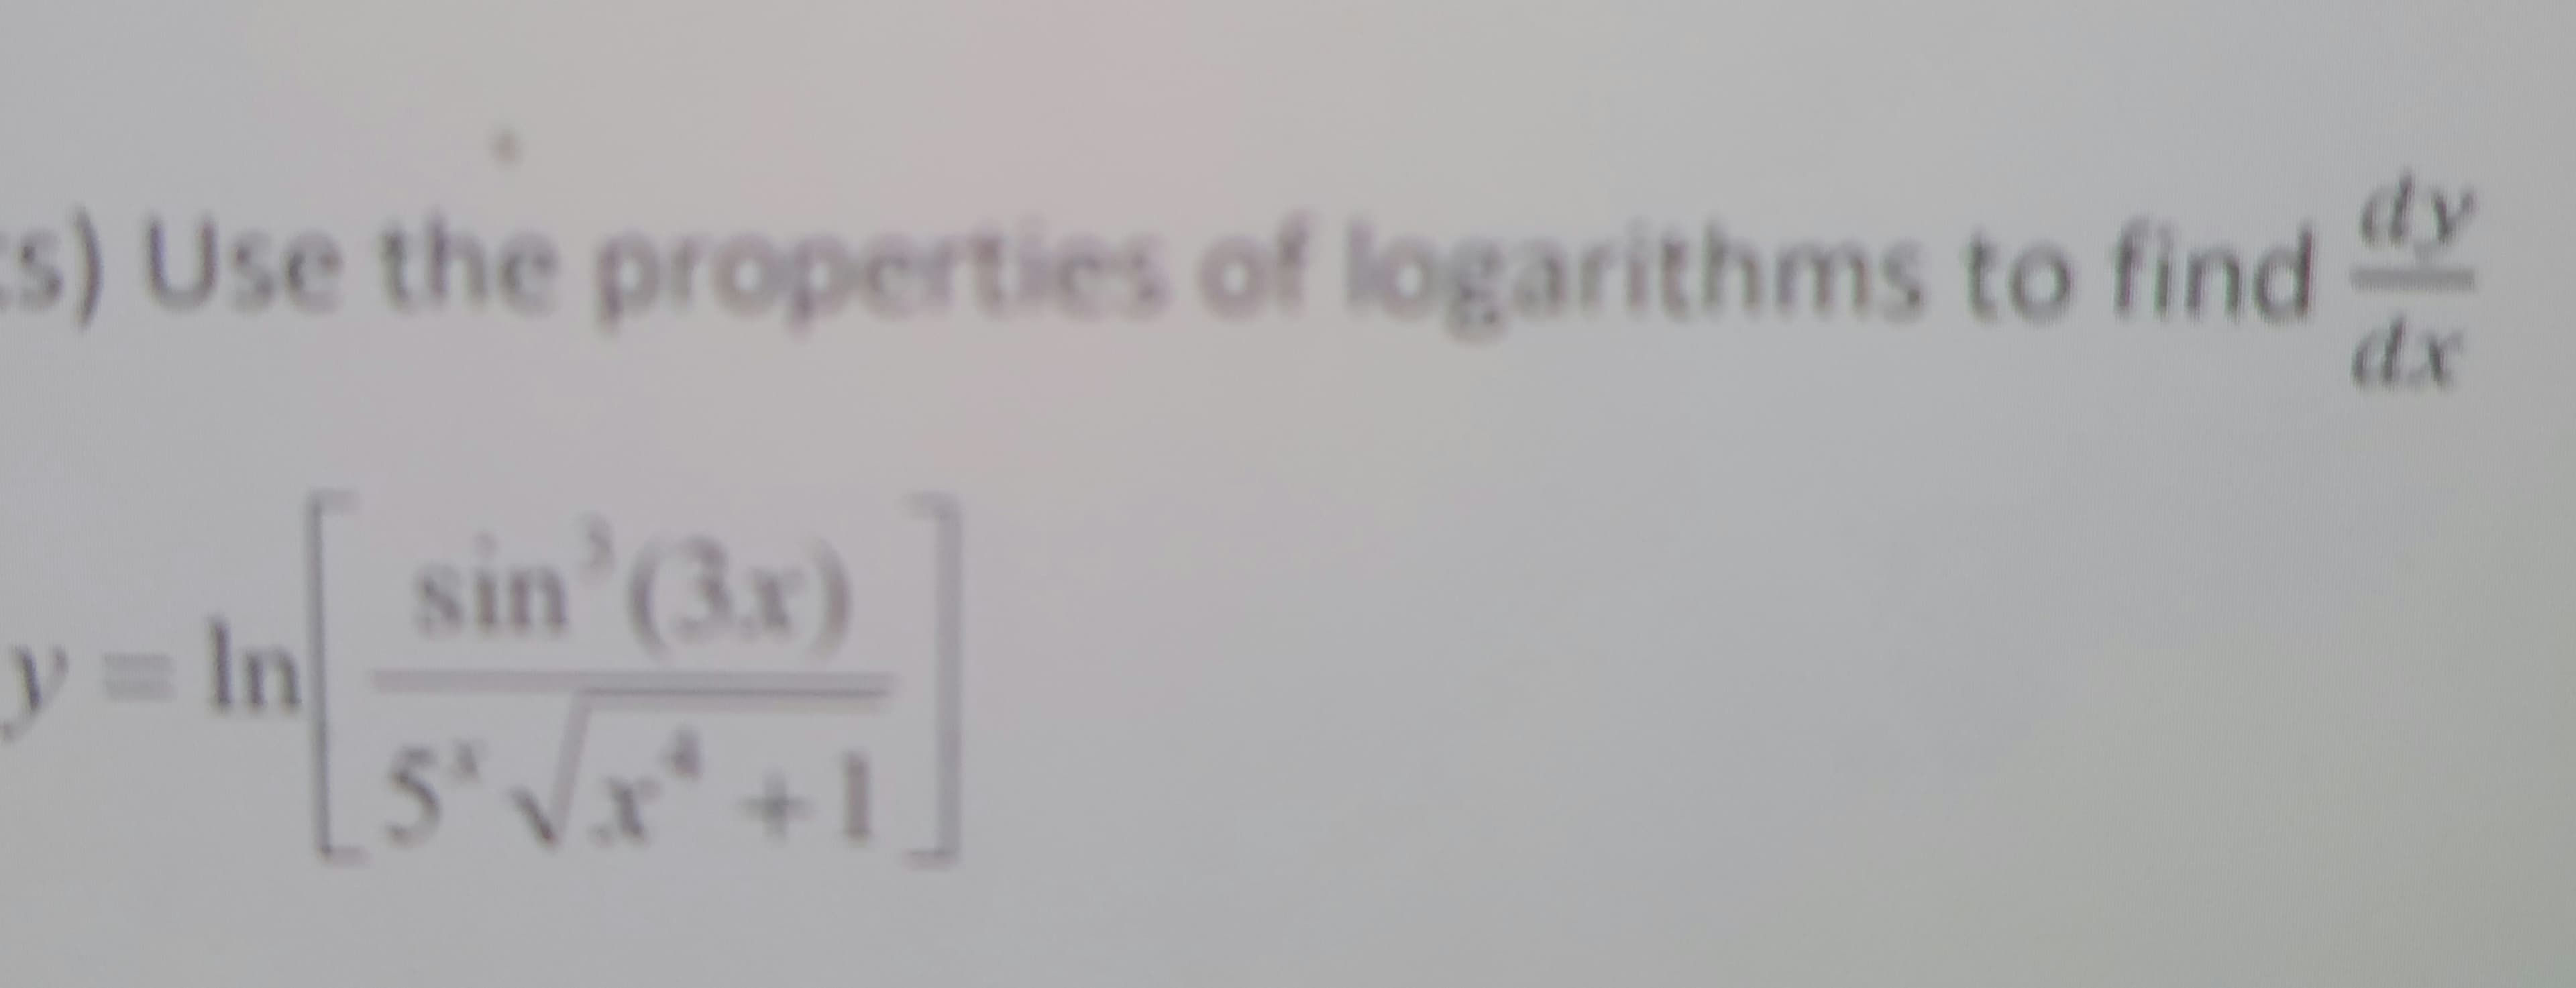 dy
s) Use the properties of logarithms to find
dx
y = In
sin' (3x)
5*